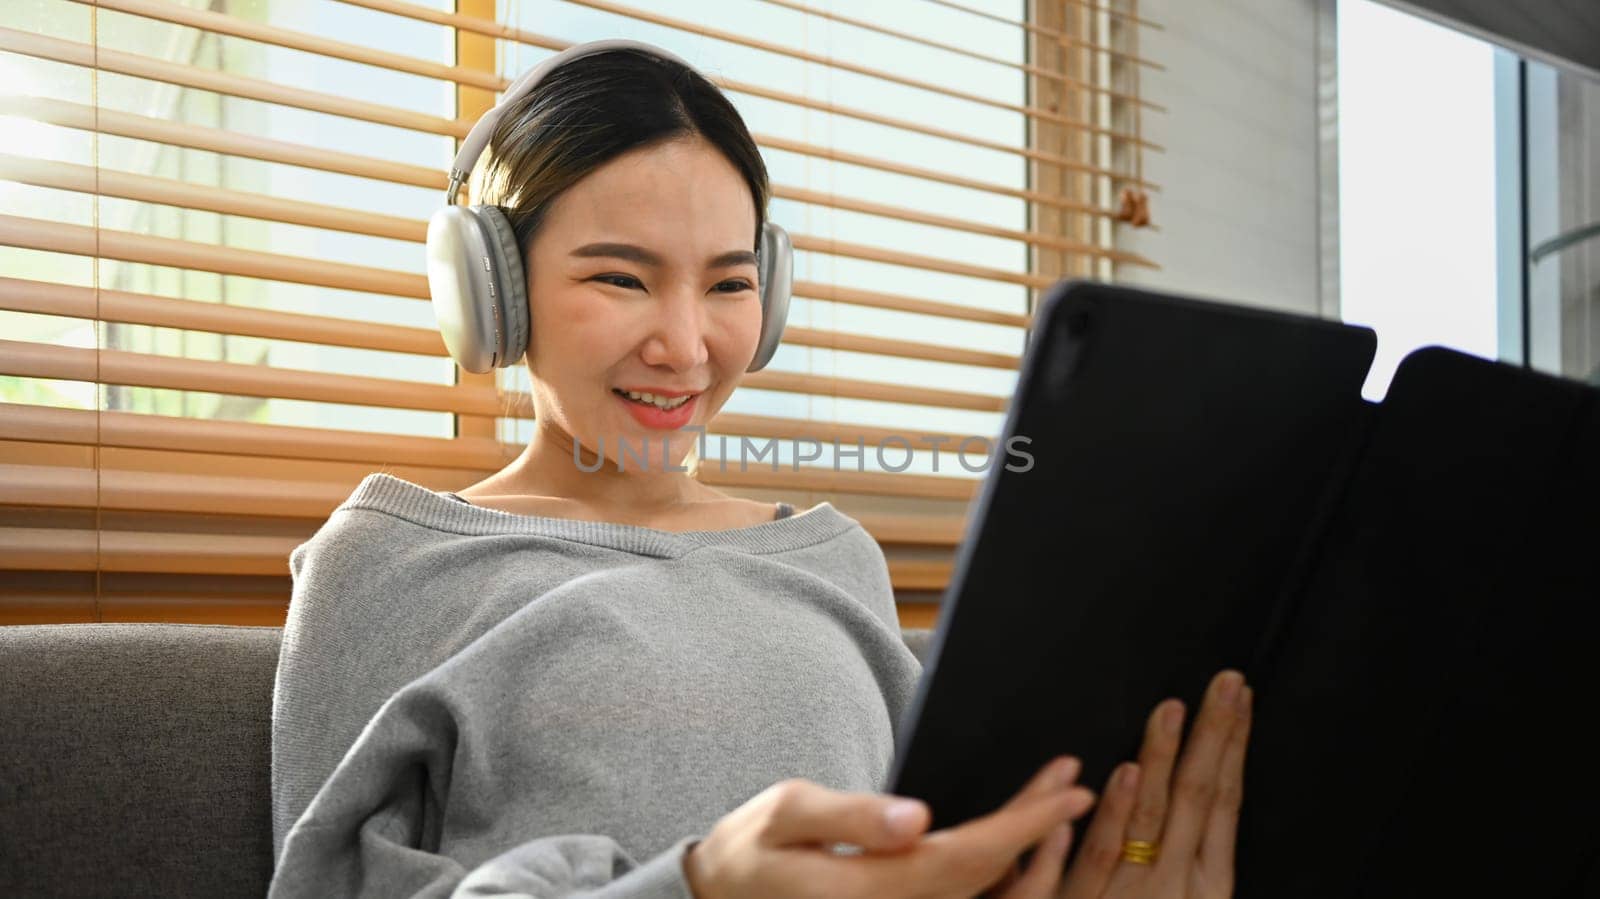 Joyful young asian woman wearing headphone and watching movie on digital tablet. Technology, people and lifestyle concept.